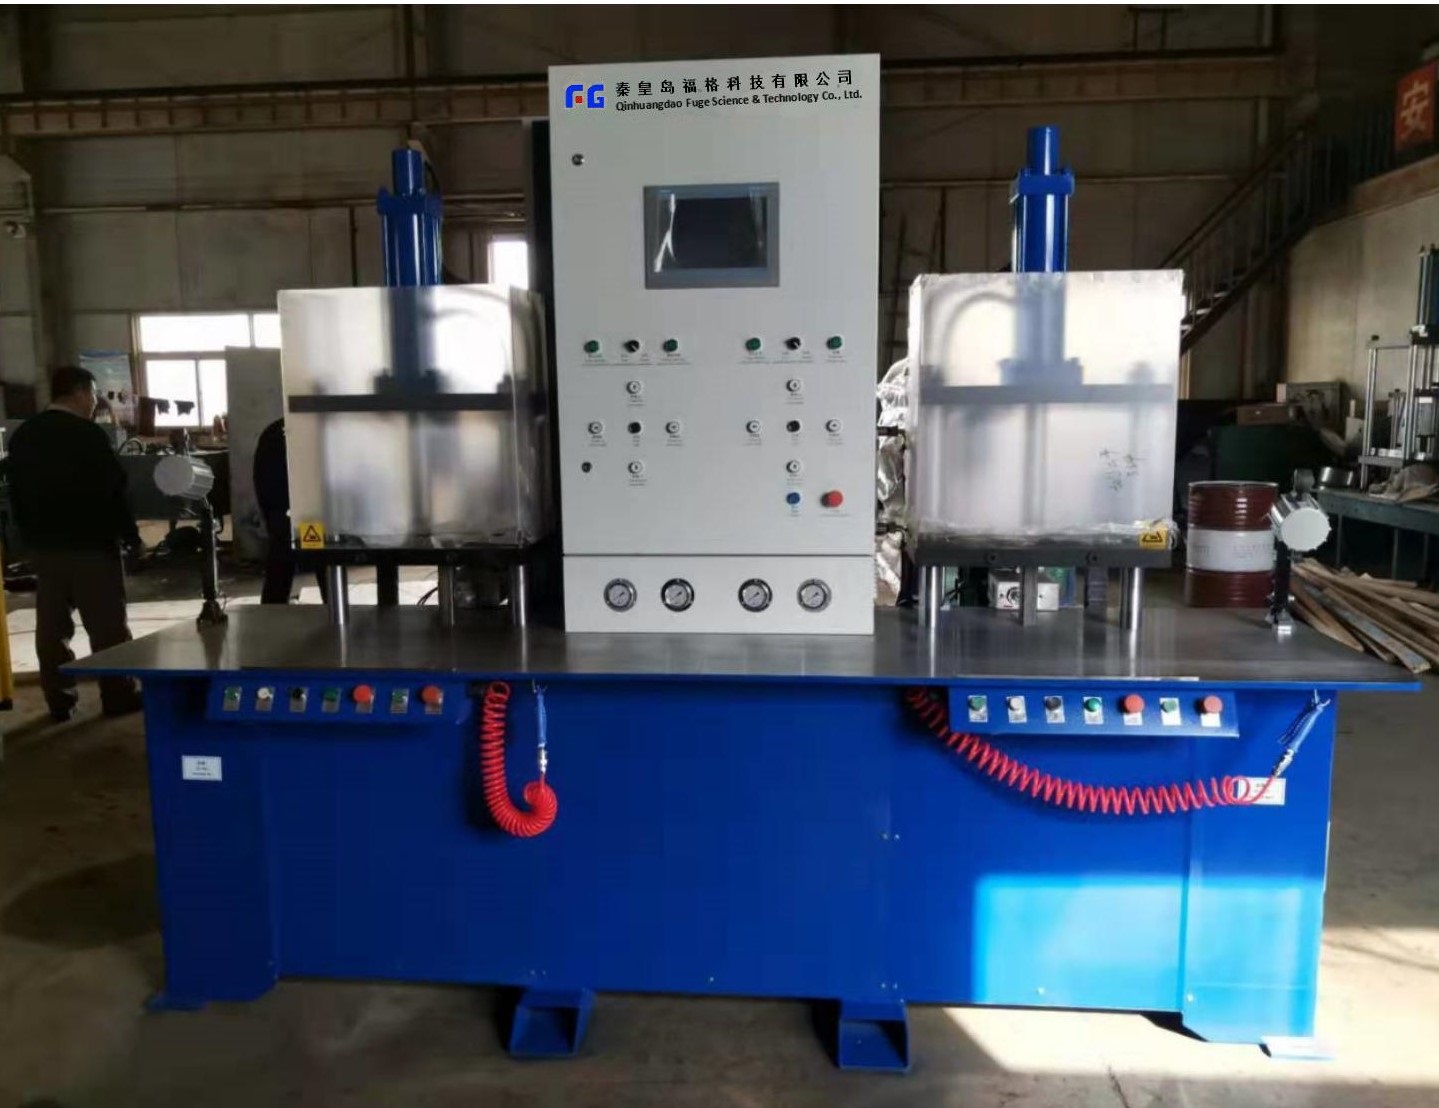 Double Station Wax Injection Machine